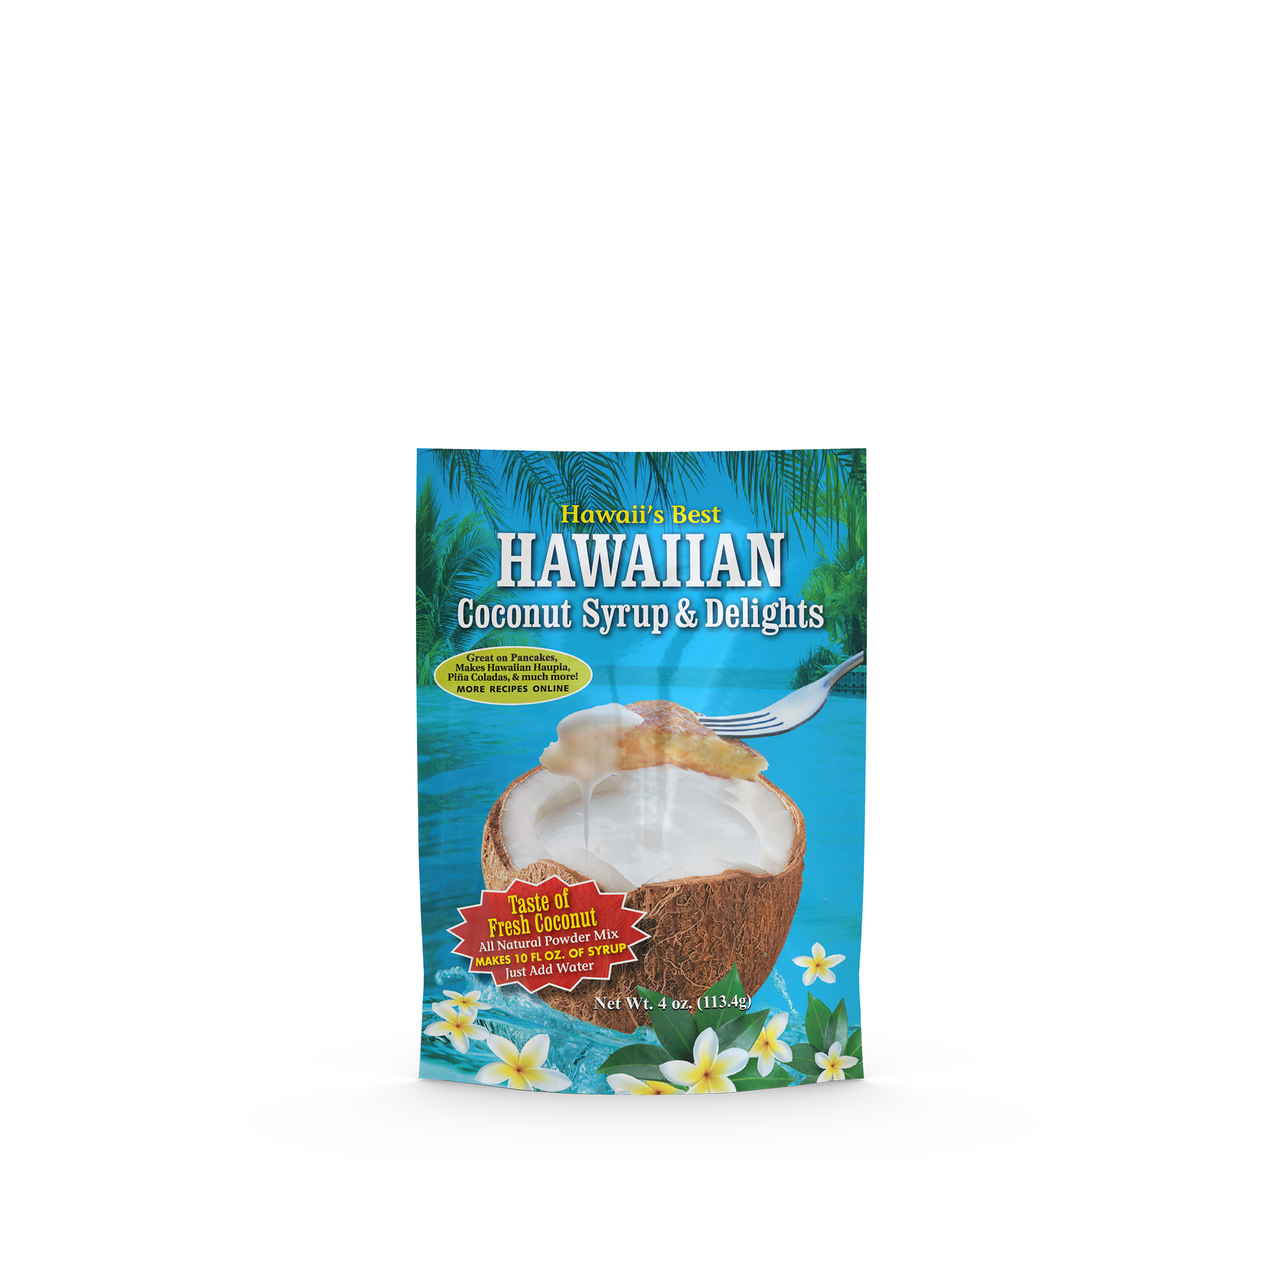 HAWAII'S BEST COCONUT SYRUP MIX, 4 Ounces